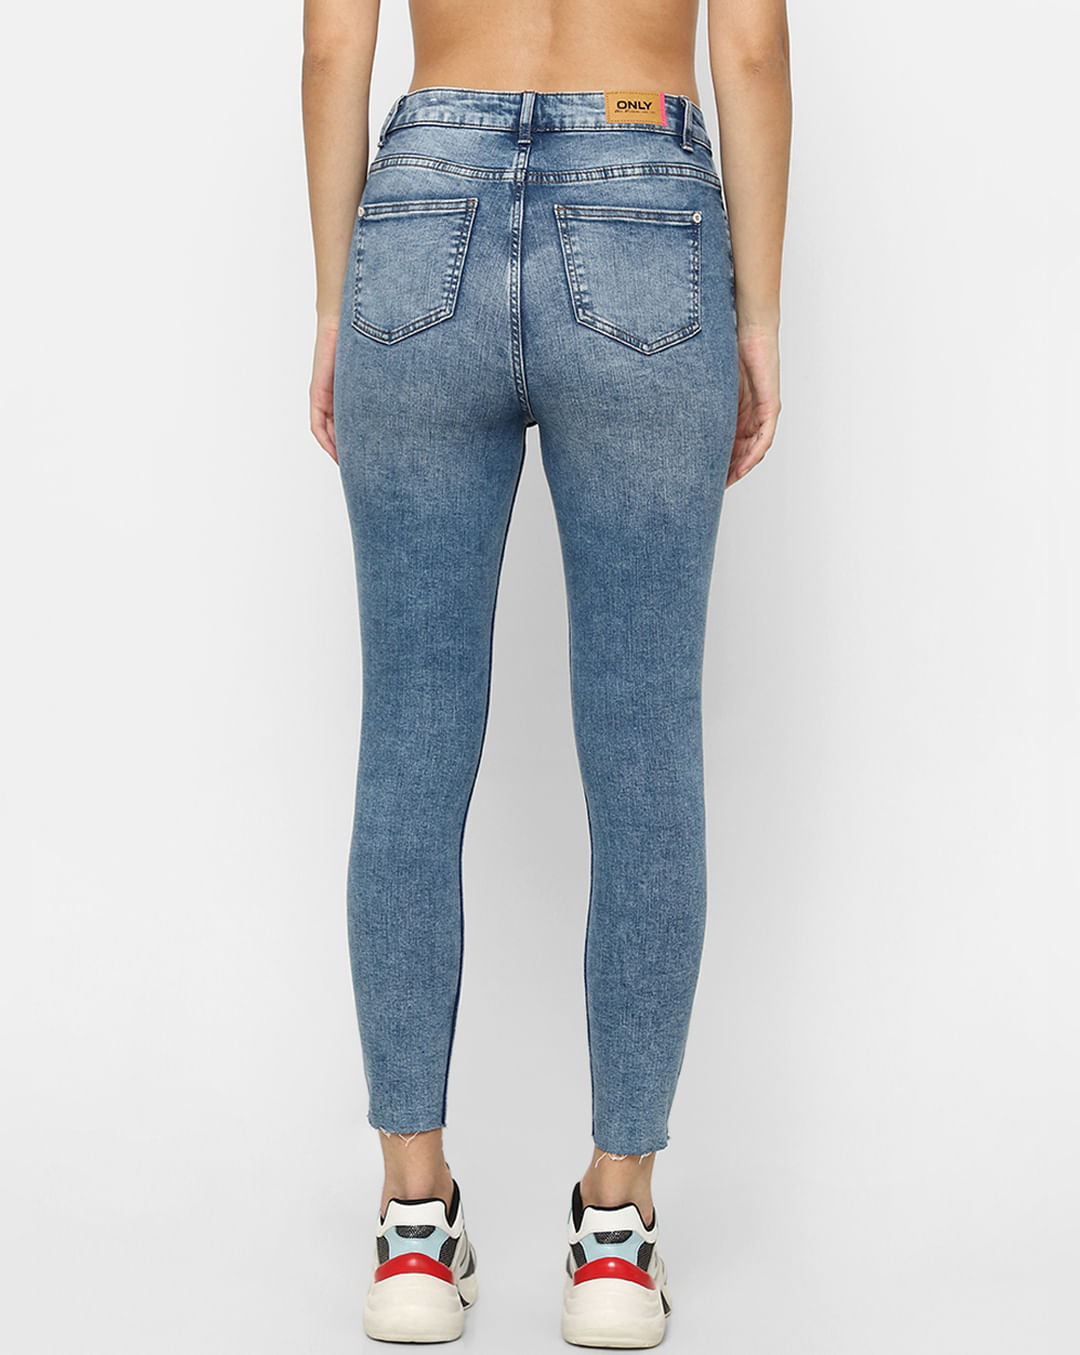 Buy Blue High Rise Ripped Skinny Jeans for Women, ONLY